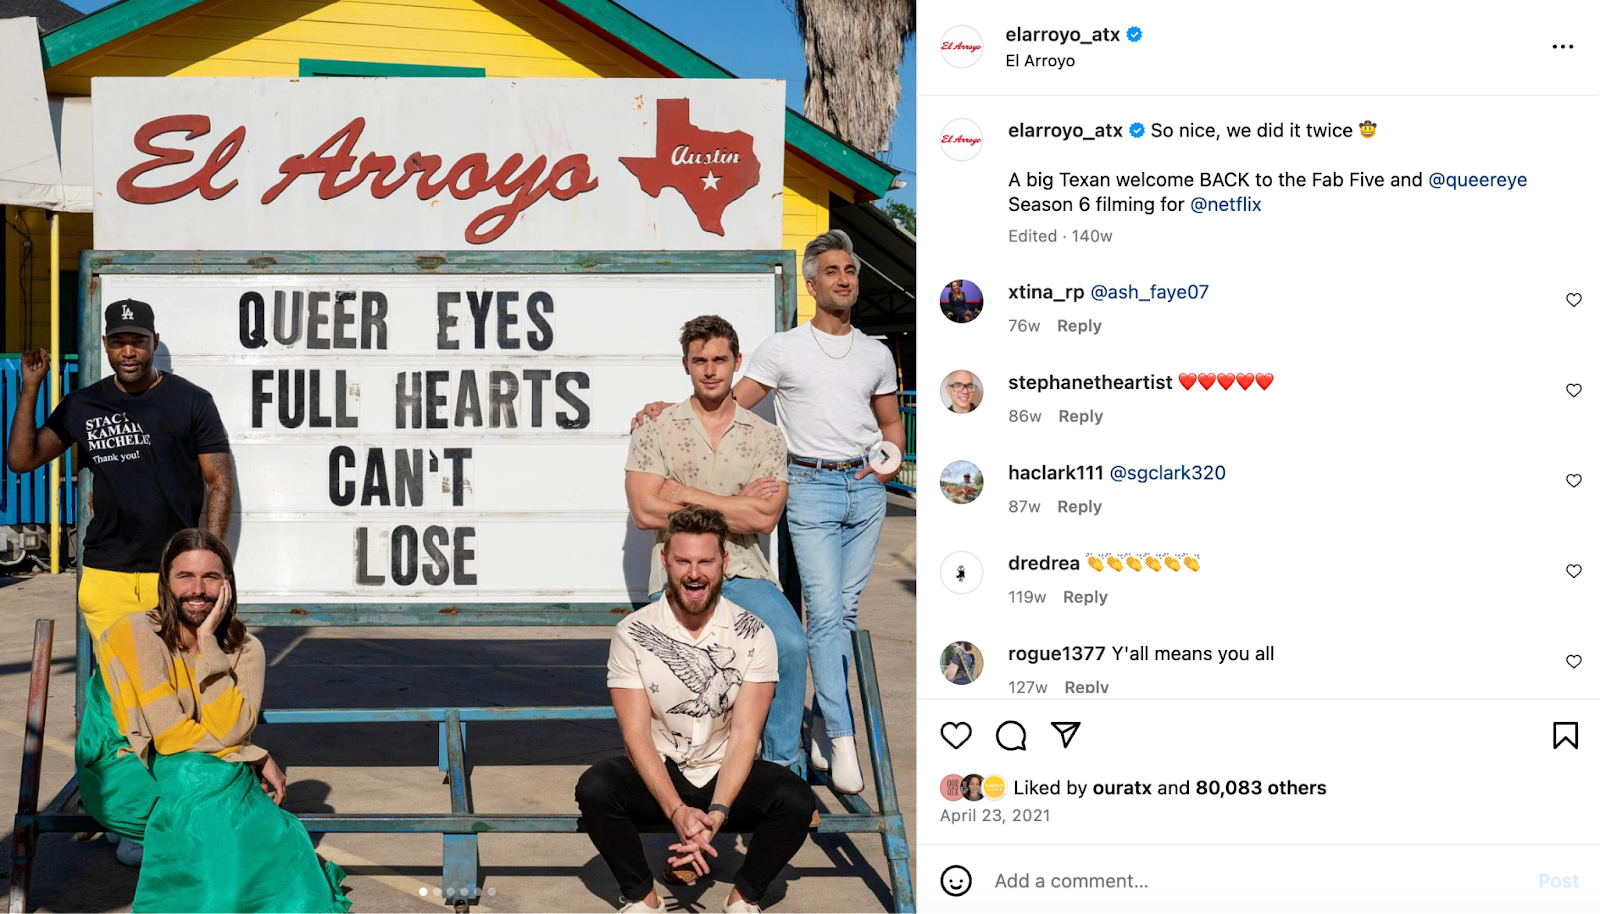 Creative restaurant marketing ideas: The cast of Queer Eye poses in front of El Arroyo’s marquee sign to promote the show.